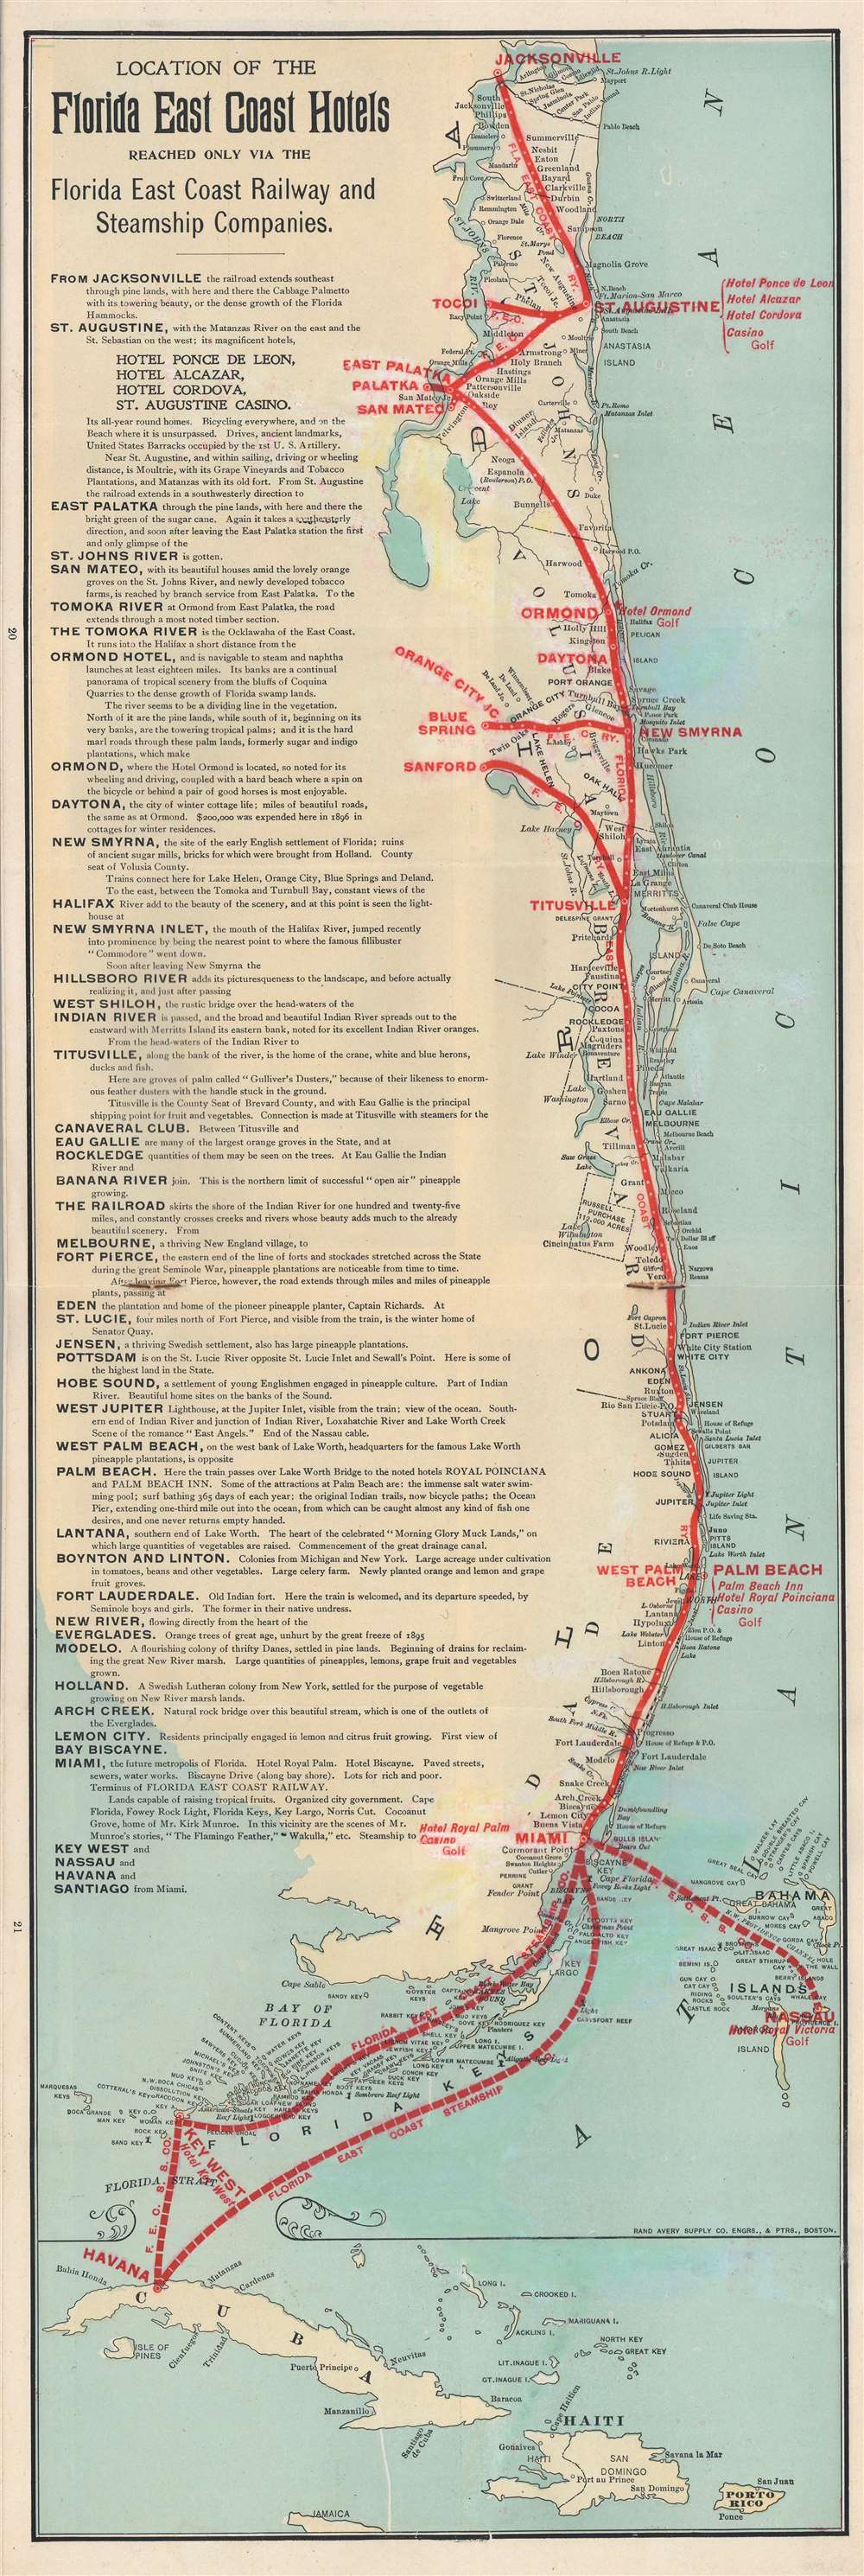 Location of the Florida East Coast Hotels Reached Only Via the Florida East Coast Railway and Steamship Companies. - Main View